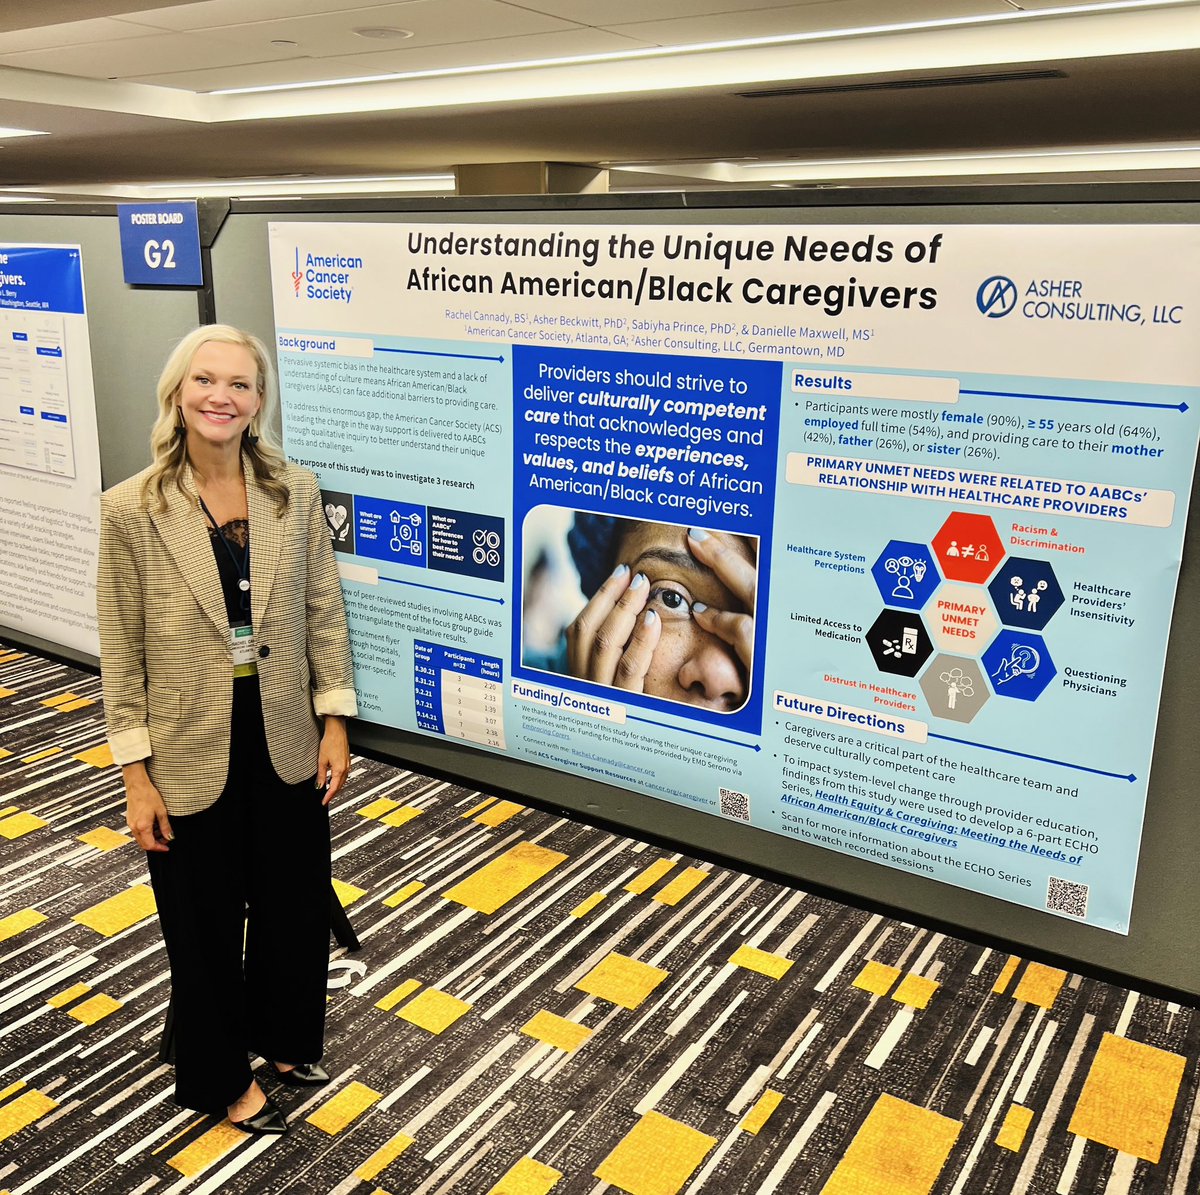 Thrilled to present at my first ASCO Quality Care Symposium on the @AmericanCancer’s commitment to meeting the needs of caregivers. If you’re here, stop by G-1 to chat. #ASCOQLTY23 #caregivers